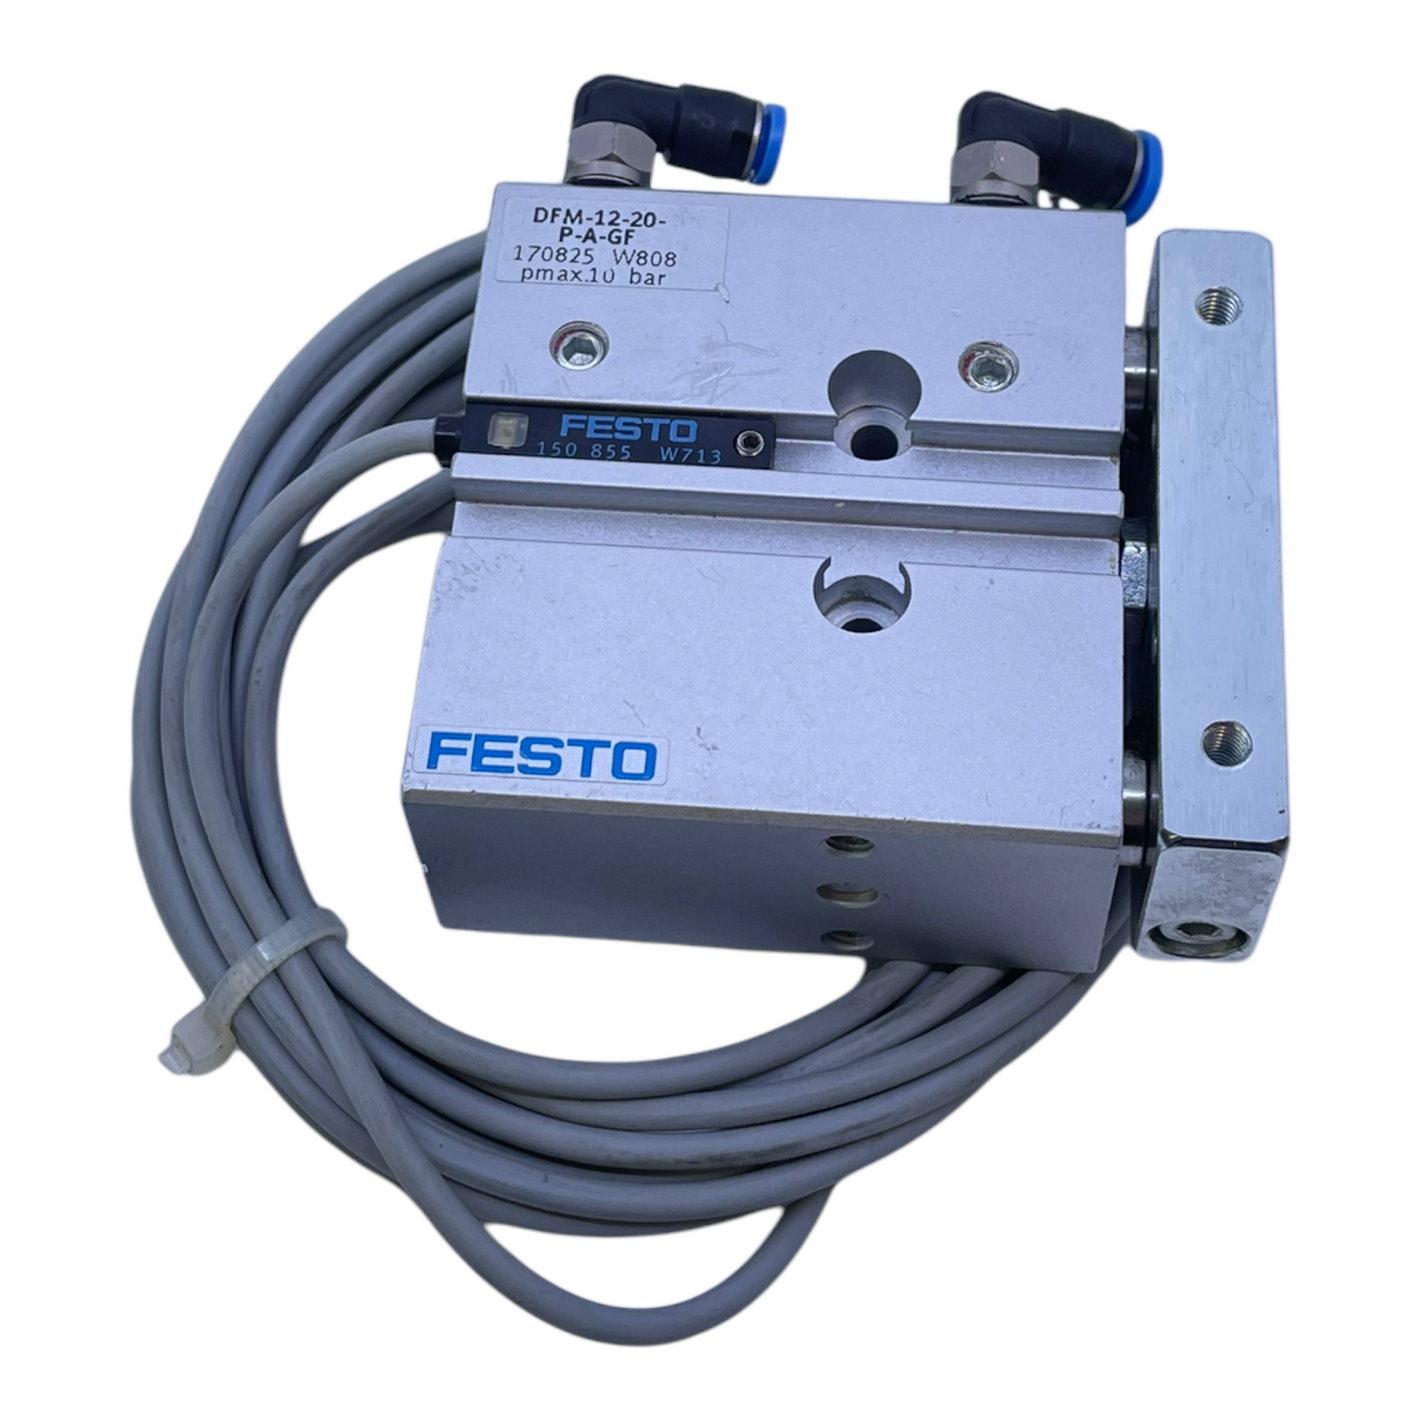 Festo DFM-12-20-PA-GF Guide cylinder 170825 for proximity switch 2 to 10 bar